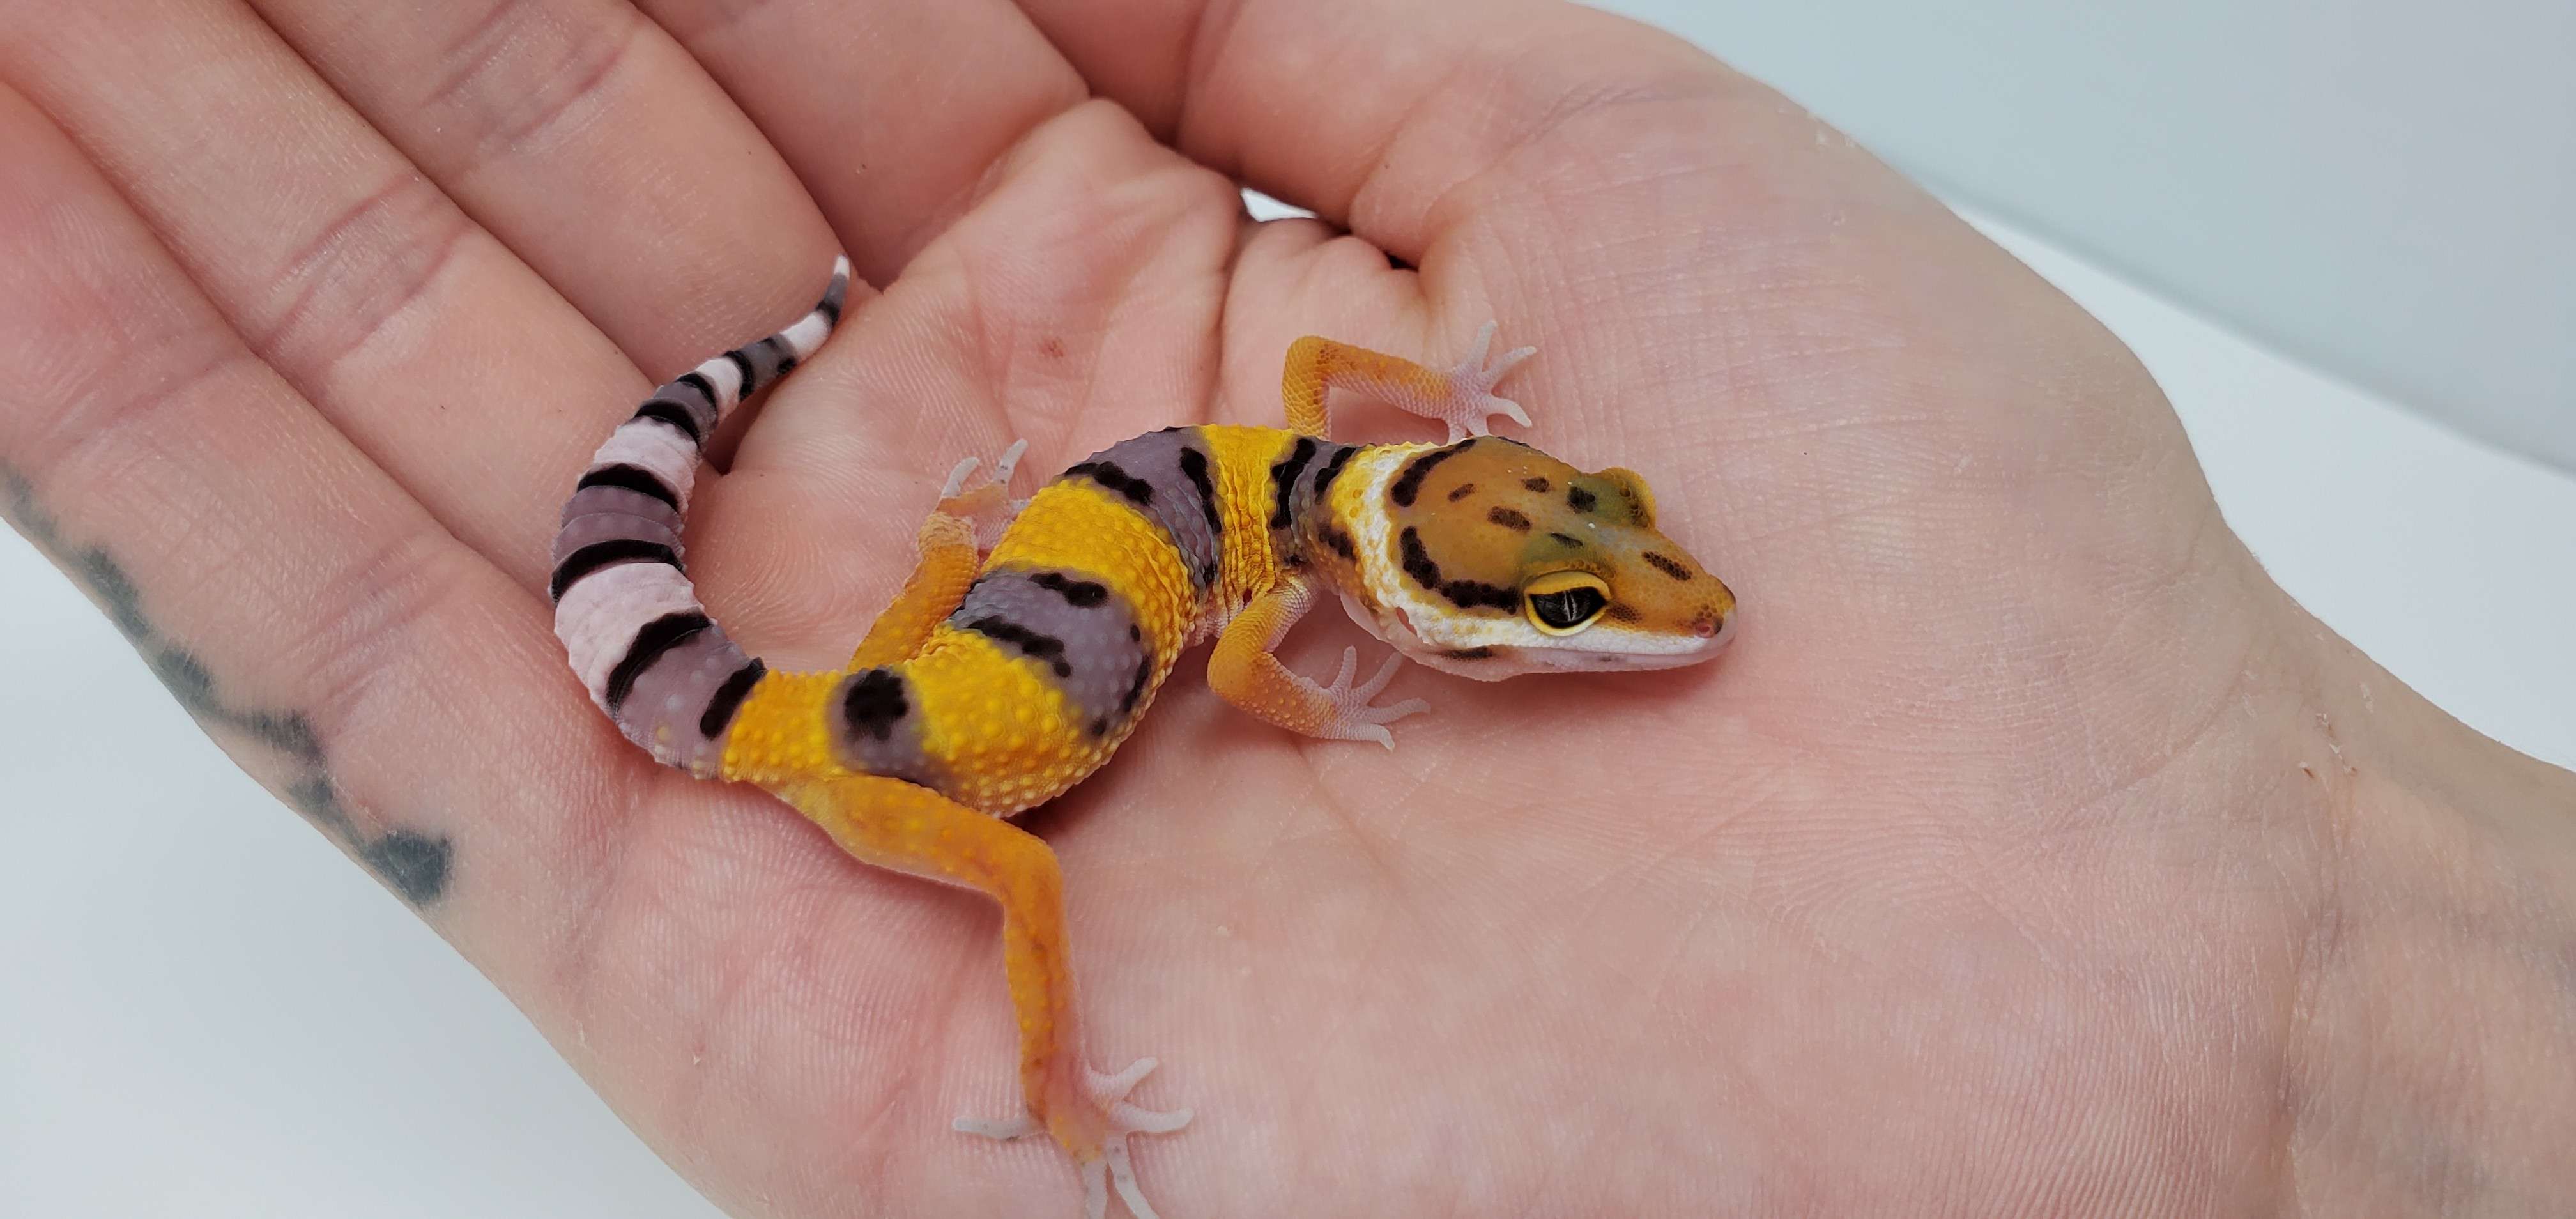 Tangerine Leopard Gecko by Good Guy Reptile Family